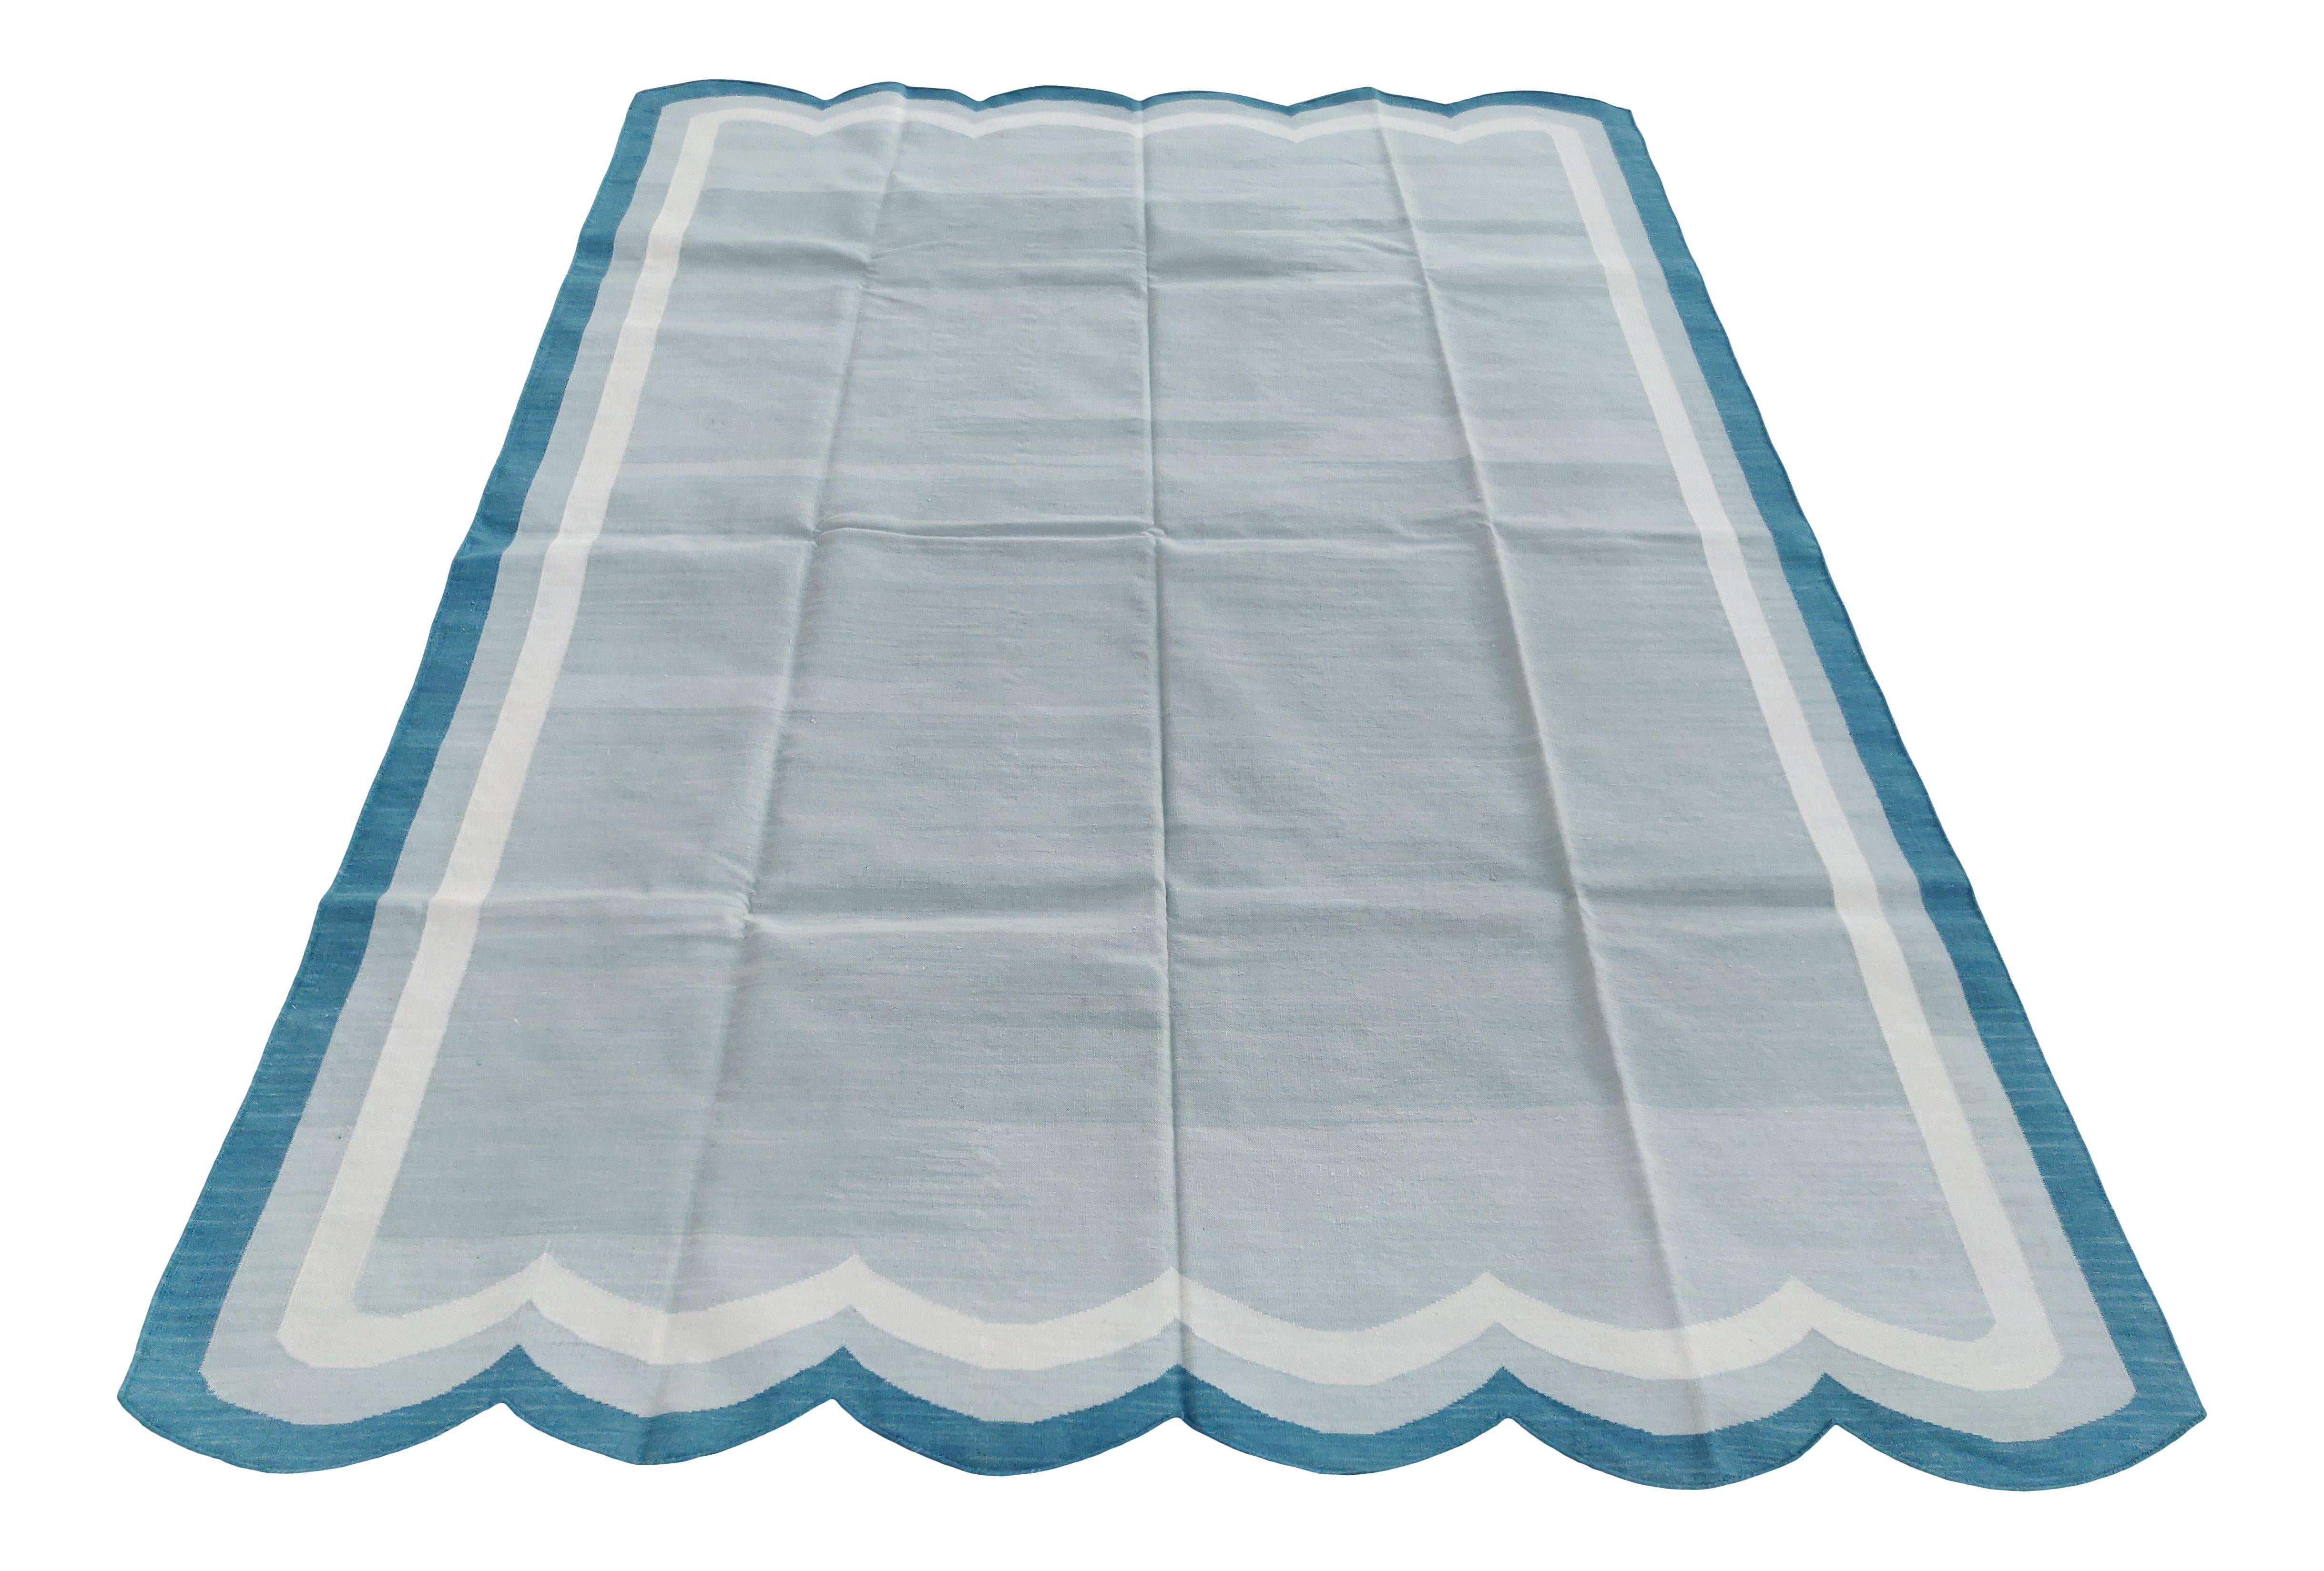 Cotton Vegetable Dyed Grey, Cream And Teal Blue Two Sided Scalloped Rug-6'x9' 
(Scallops runs on 6 Feet Sides)
These special flat-weave dhurries are hand-woven with 15 ply 100% cotton yarn. Due to the special manufacturing techniques used to create